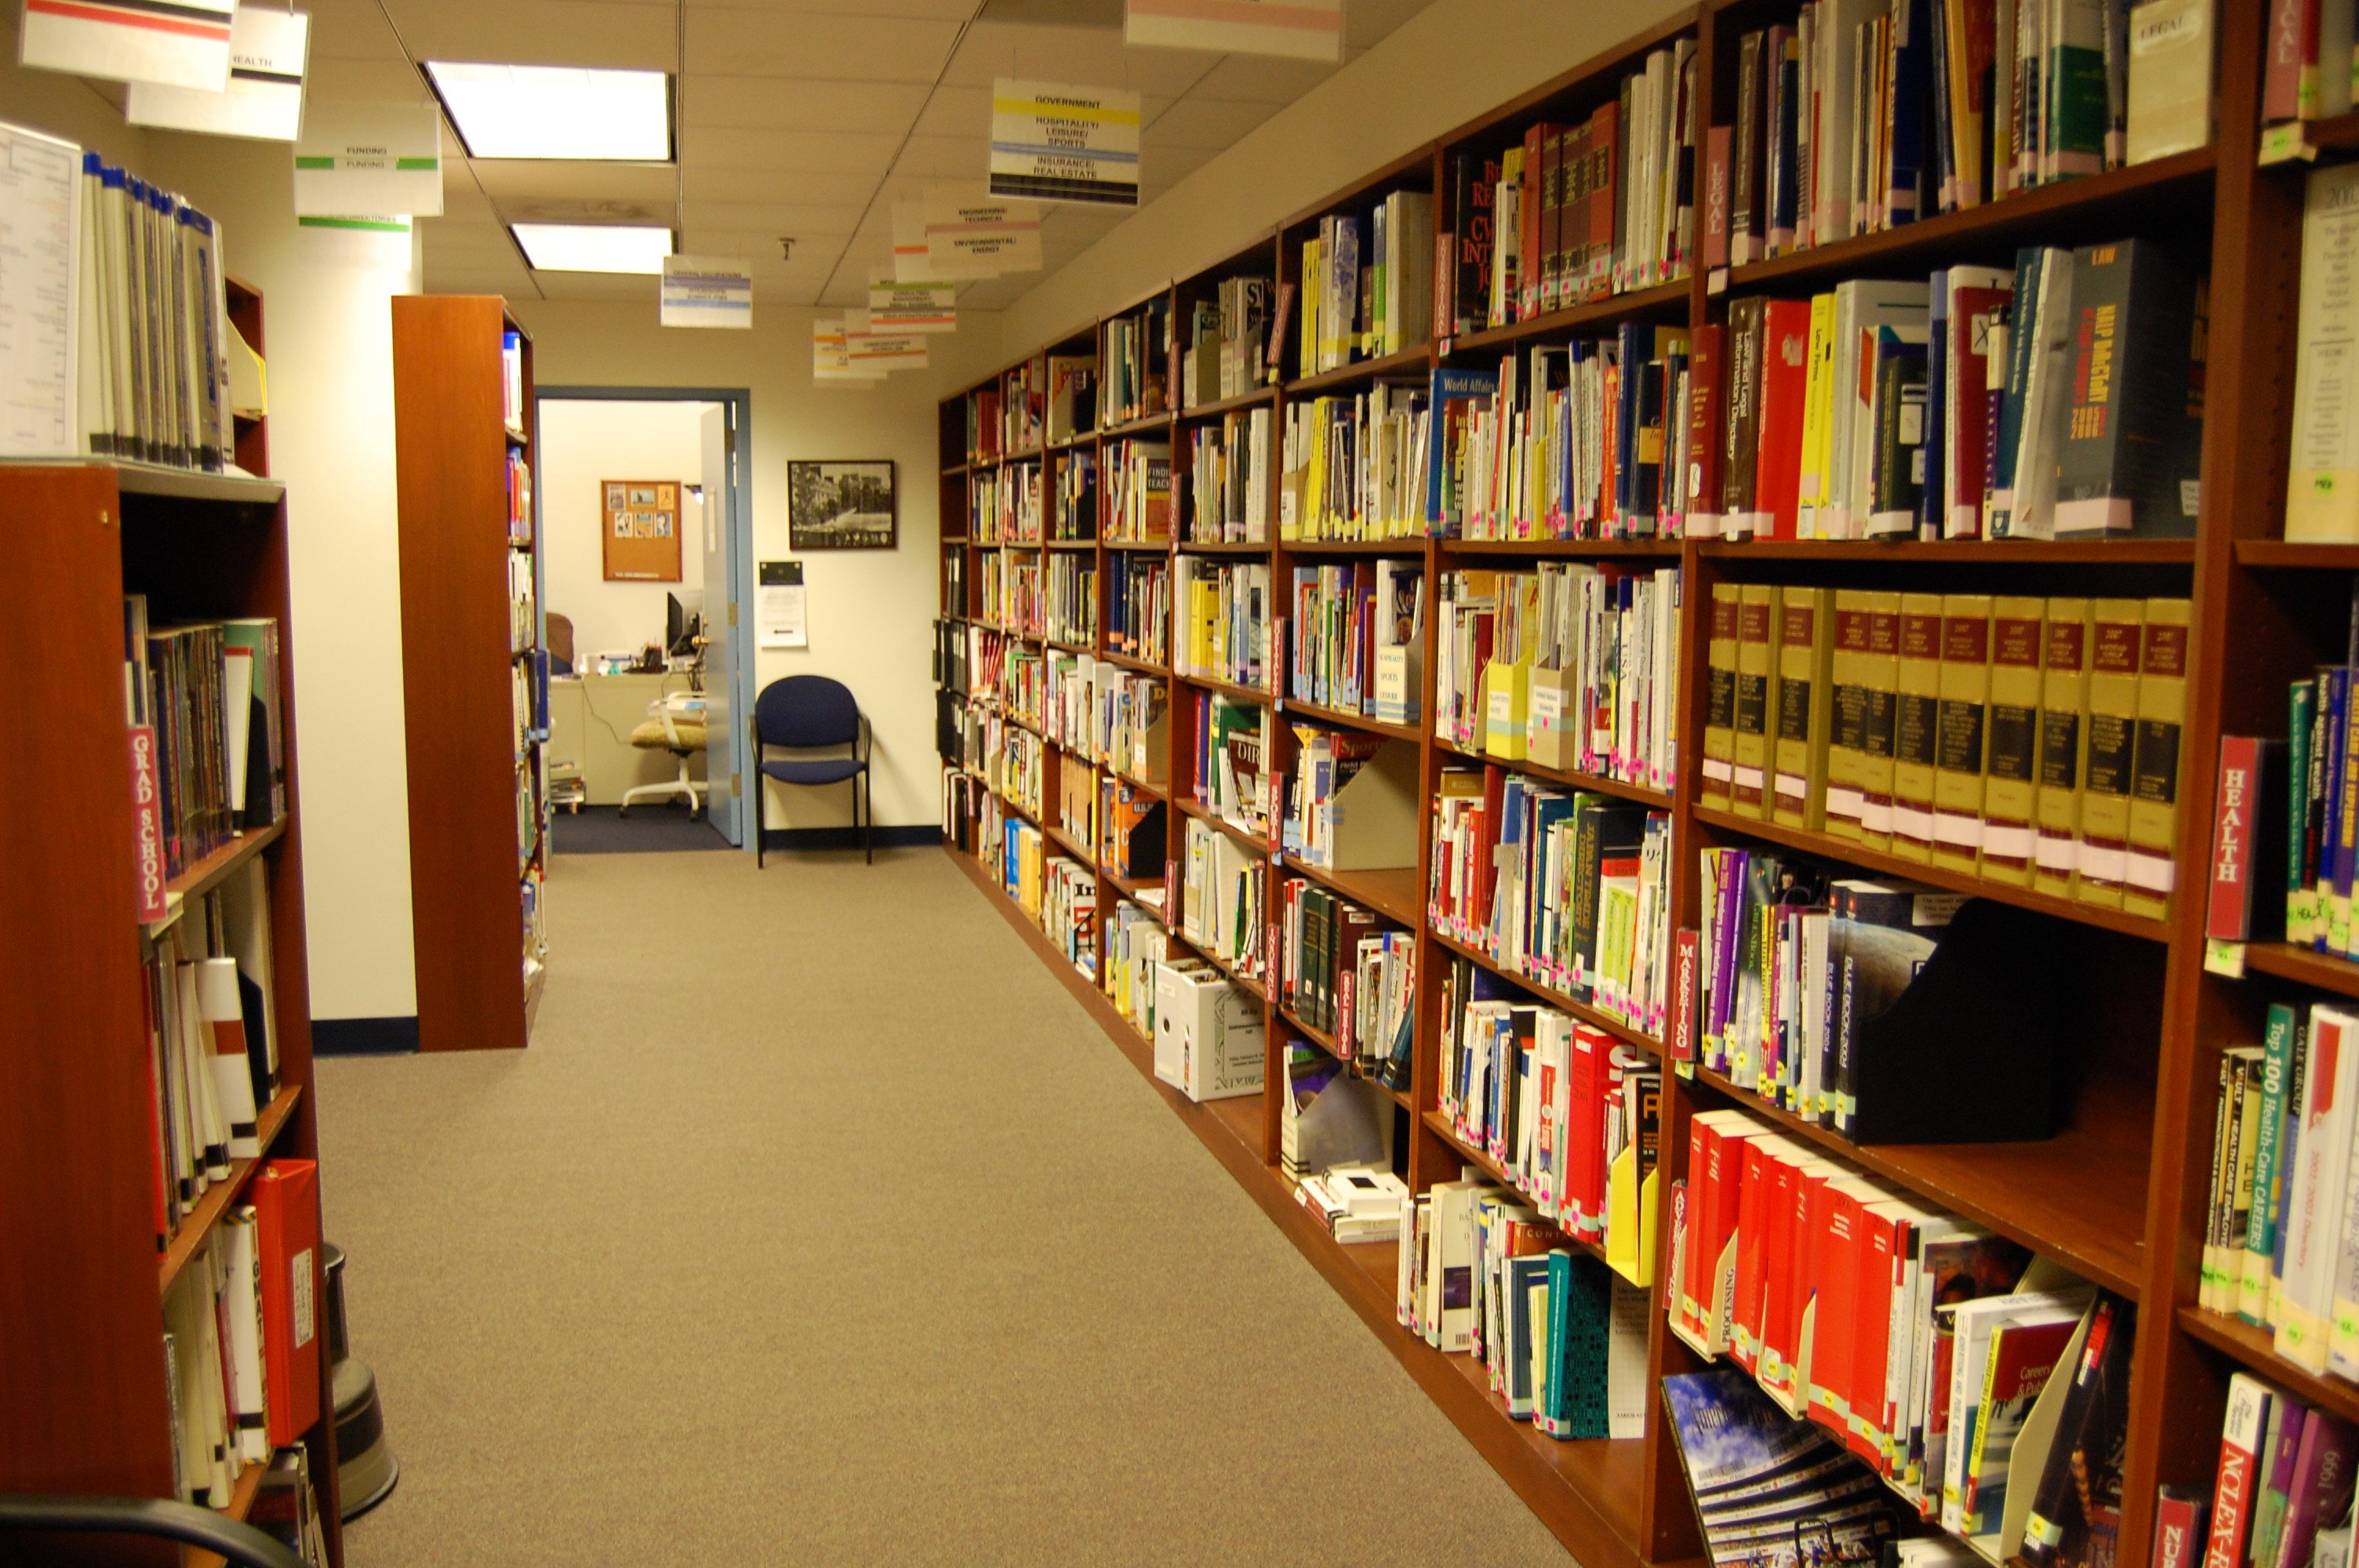 The Career Services Library